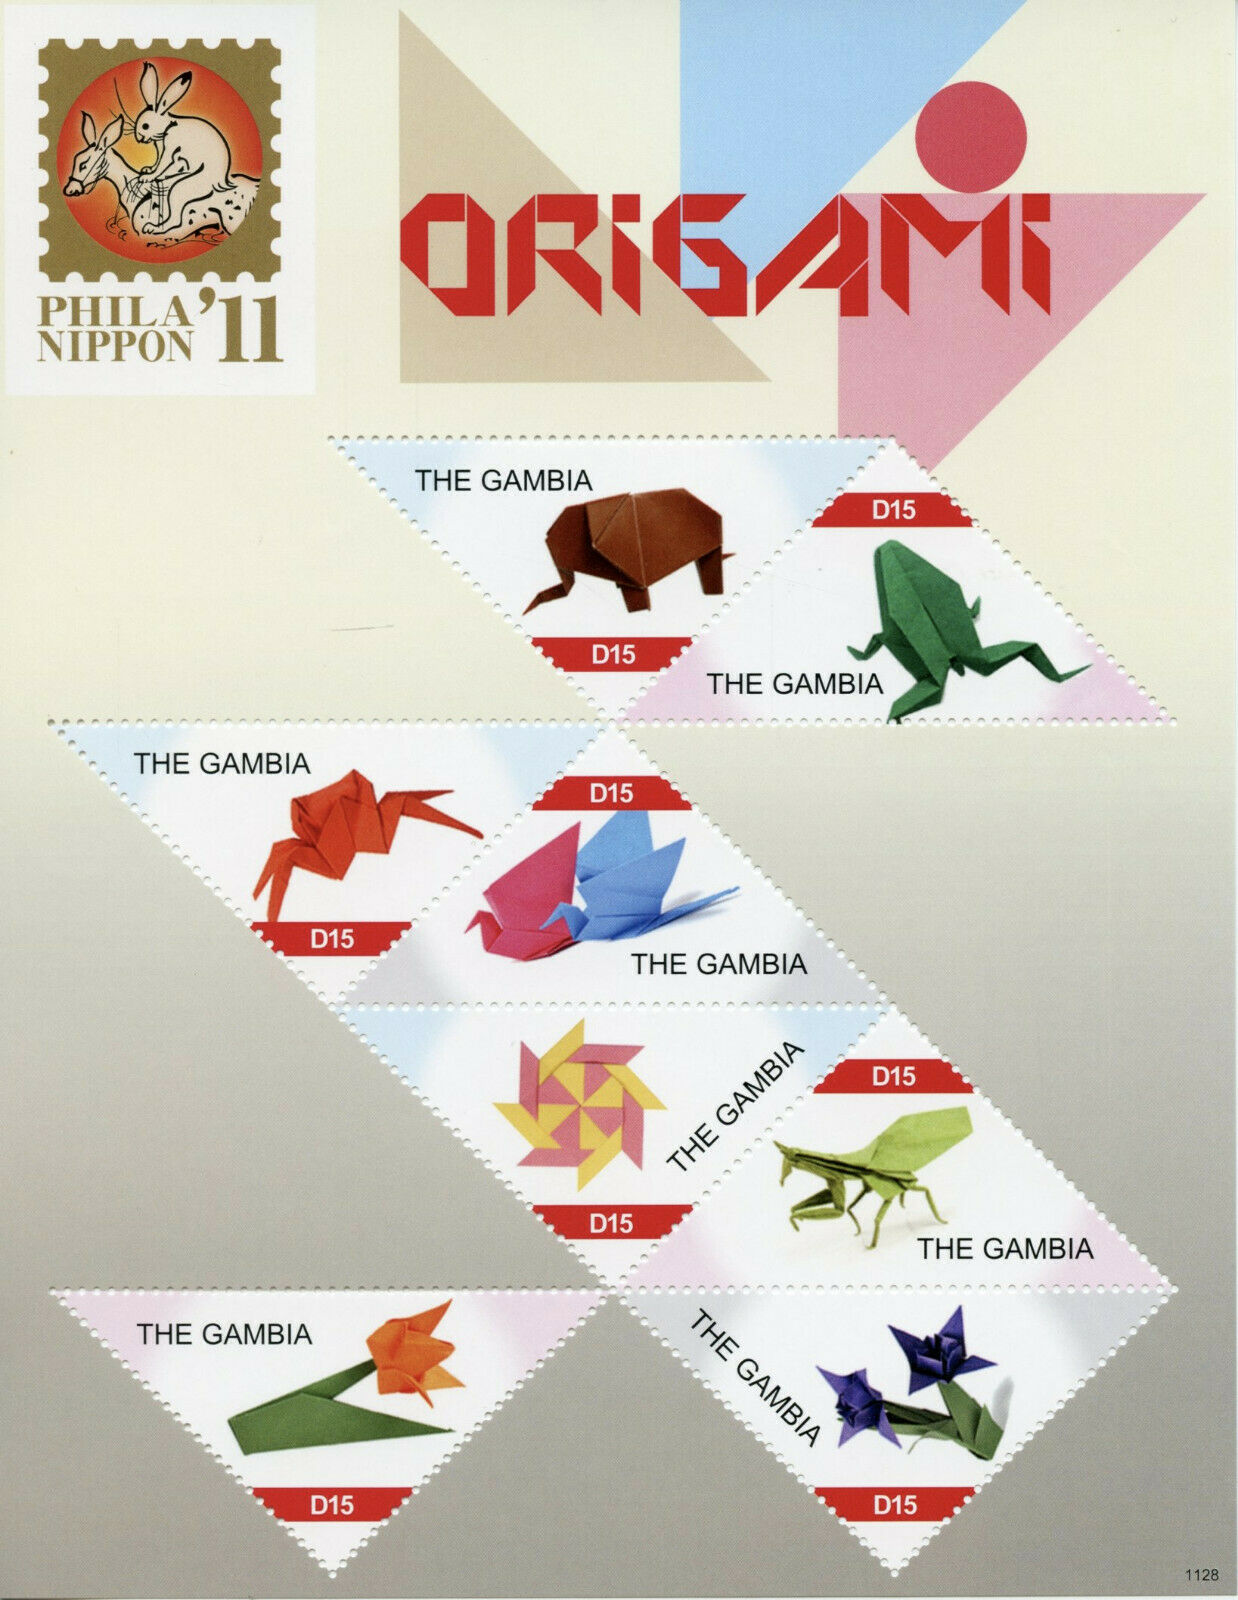 Gambia 2011 MNH Stamps Phila Nippon '11 Origami Birds Frog Elephant Crafts 8v M/S